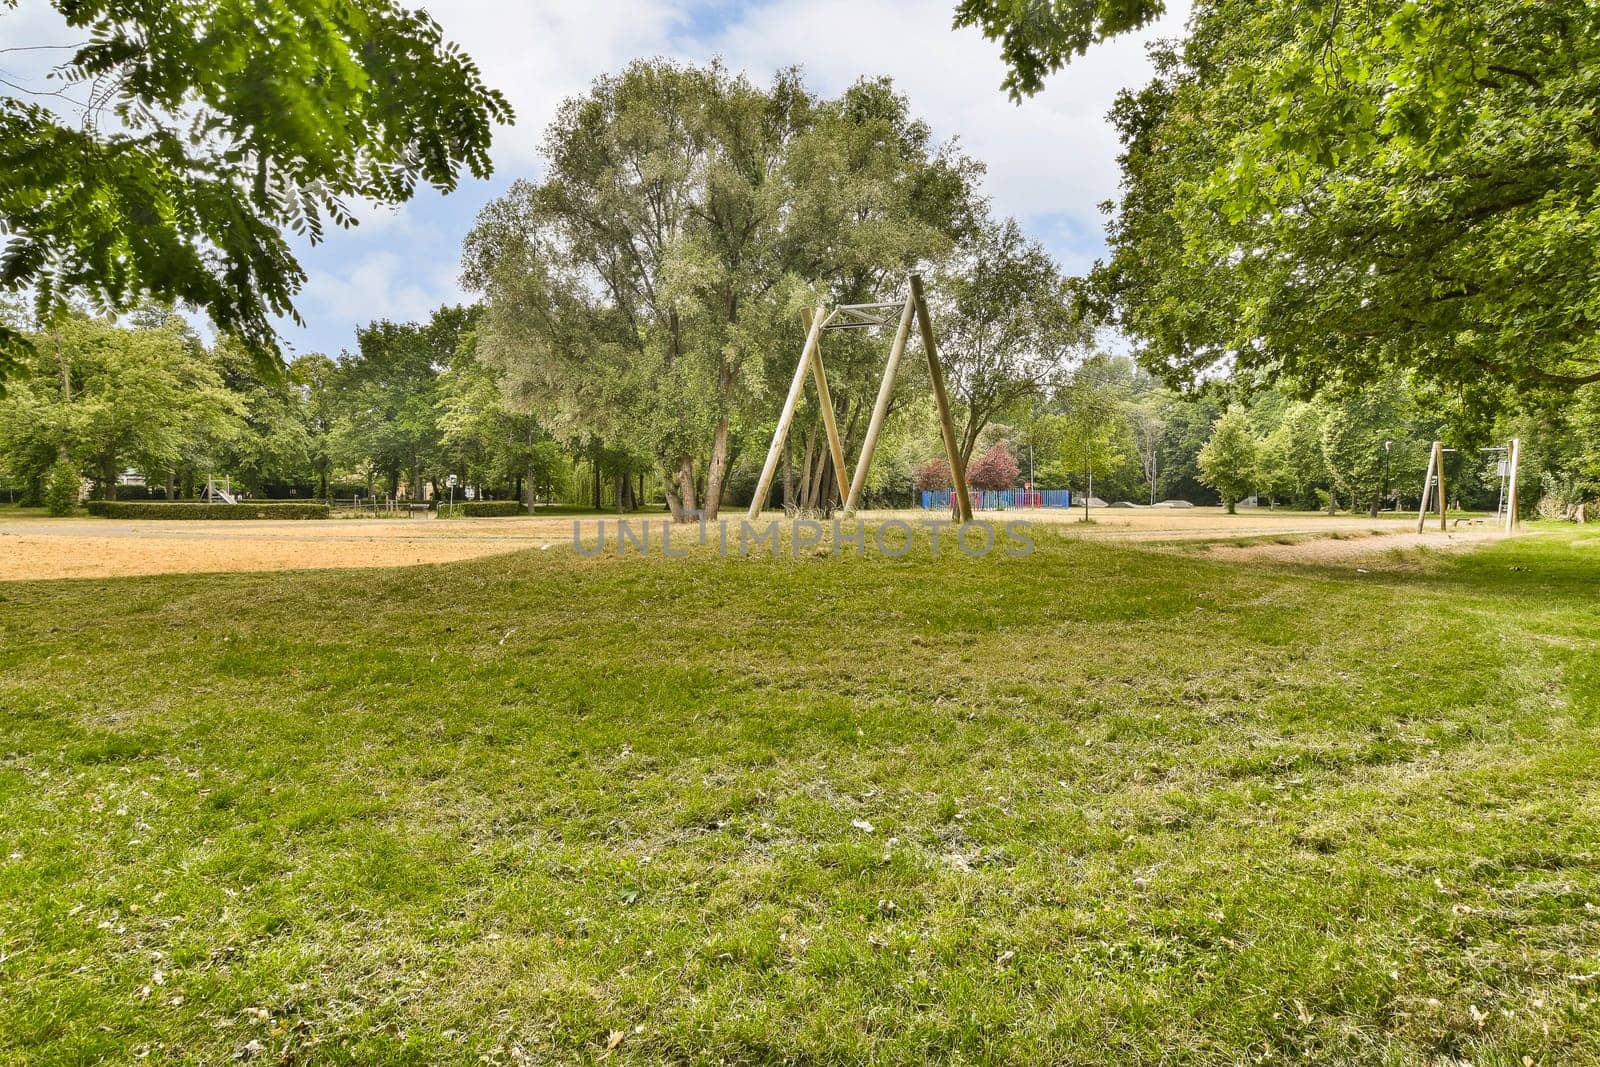 a swing set in a park with grass and trees by casamedia